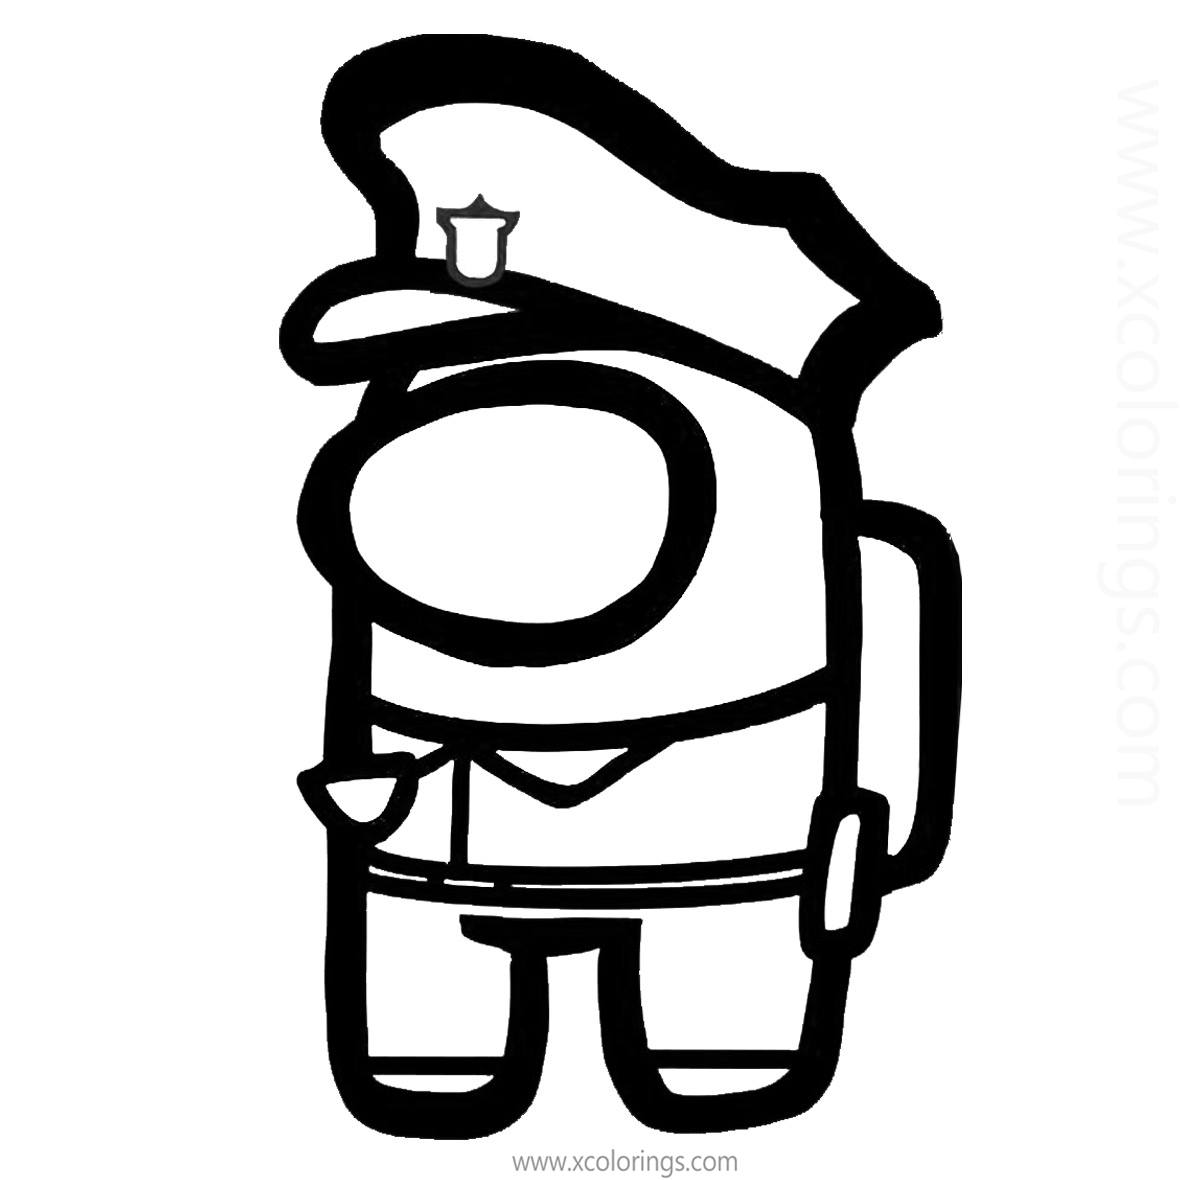 Among Us Coloring Pages Character Cop Skin